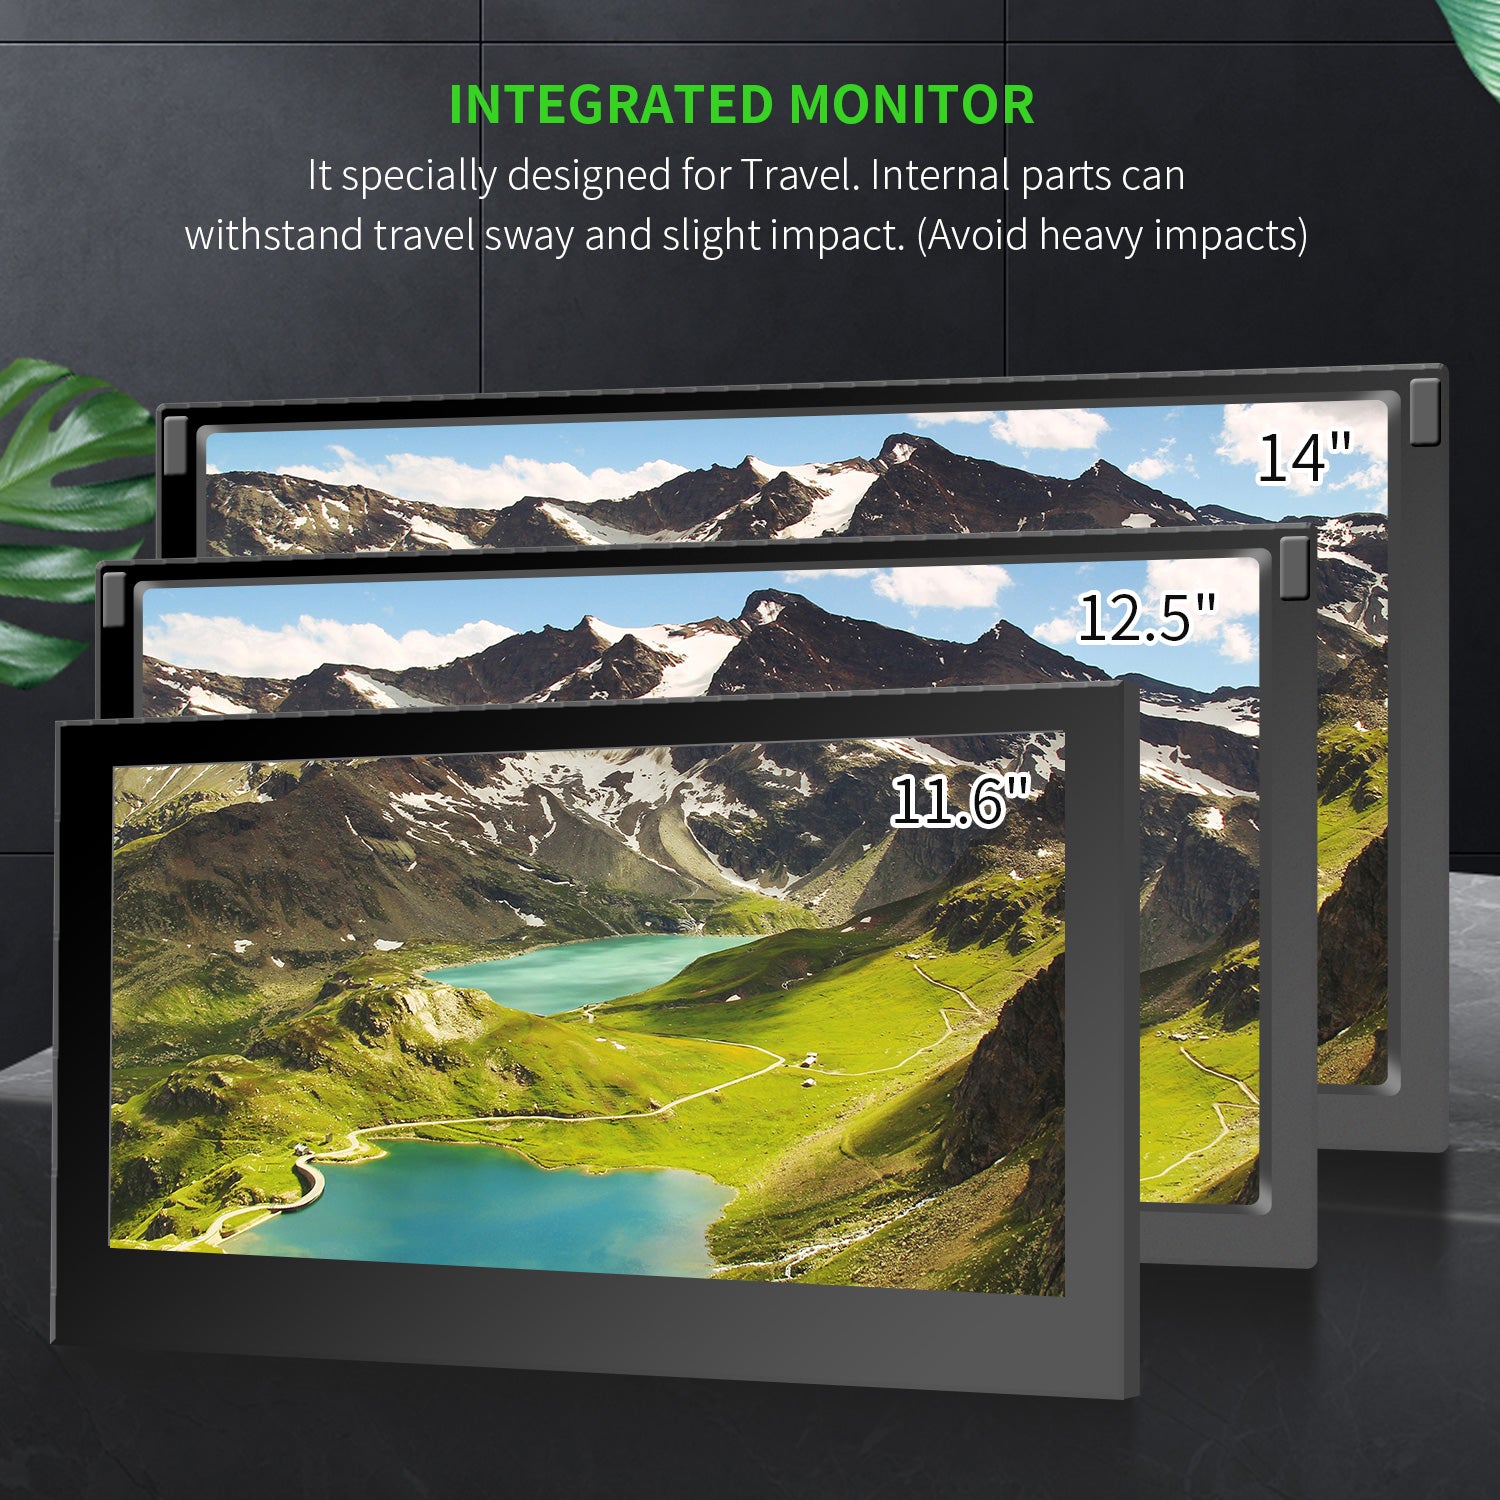  G-STORY 14'' Portable Monitor for Xbox Series X 4K Portable Gaming  Monitor IPS Screen for Xbox Series S（not Included） with Two HDMI, HDR,  Freesync Game Mode Travel (14“&4K for Xbox Series